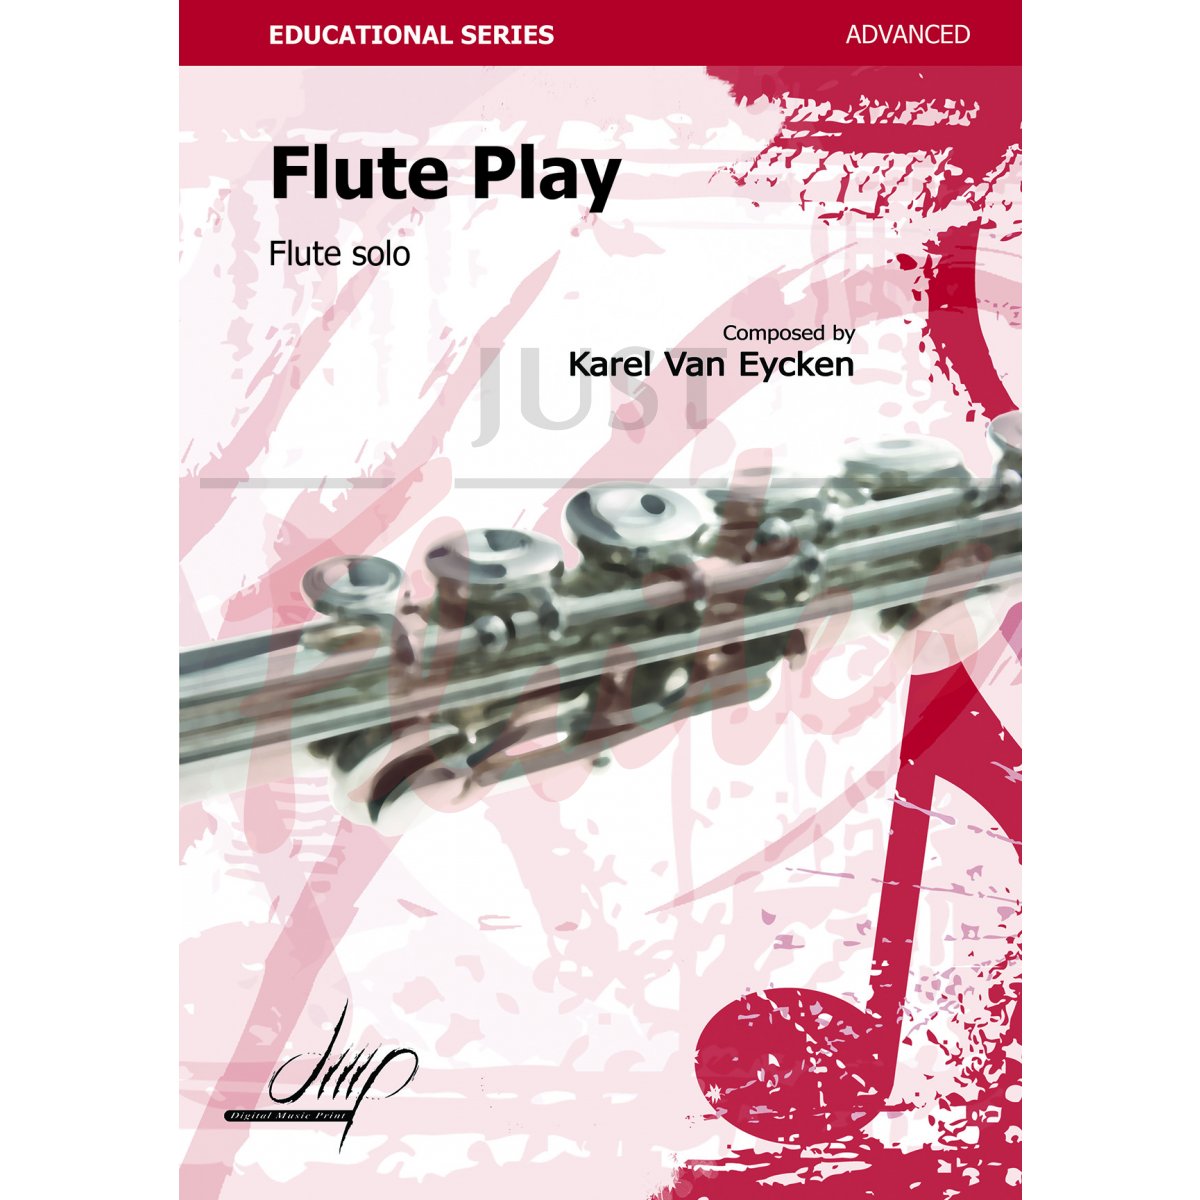 Flute Play